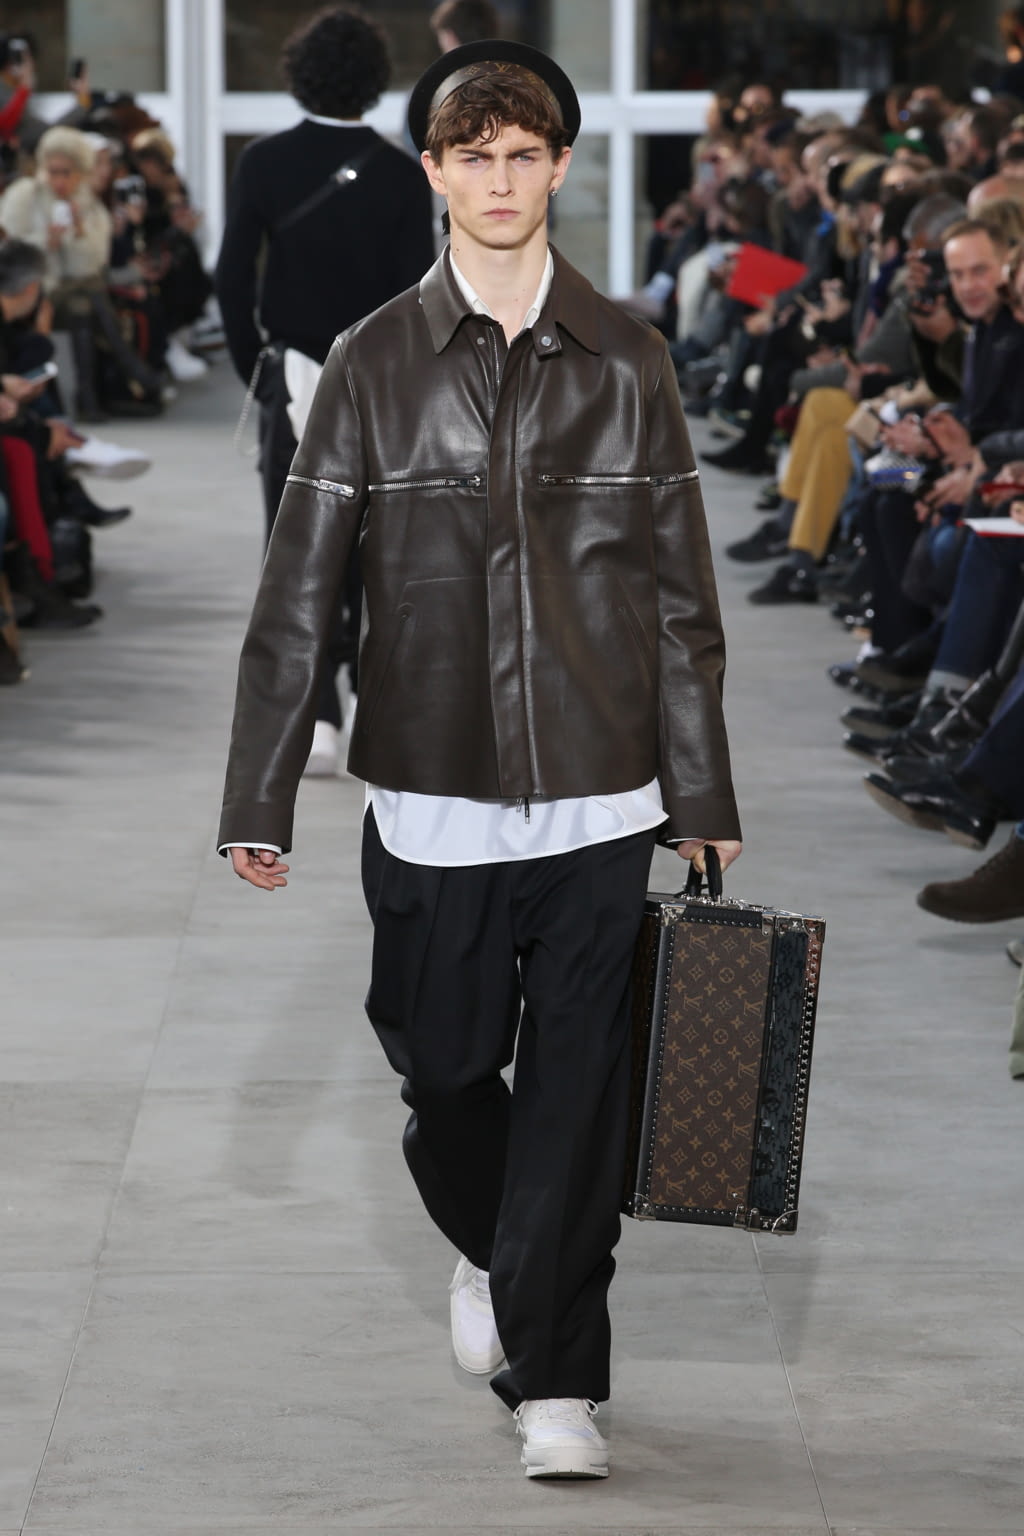 The Louis Vuitton Fall-Winter 2017 Collection